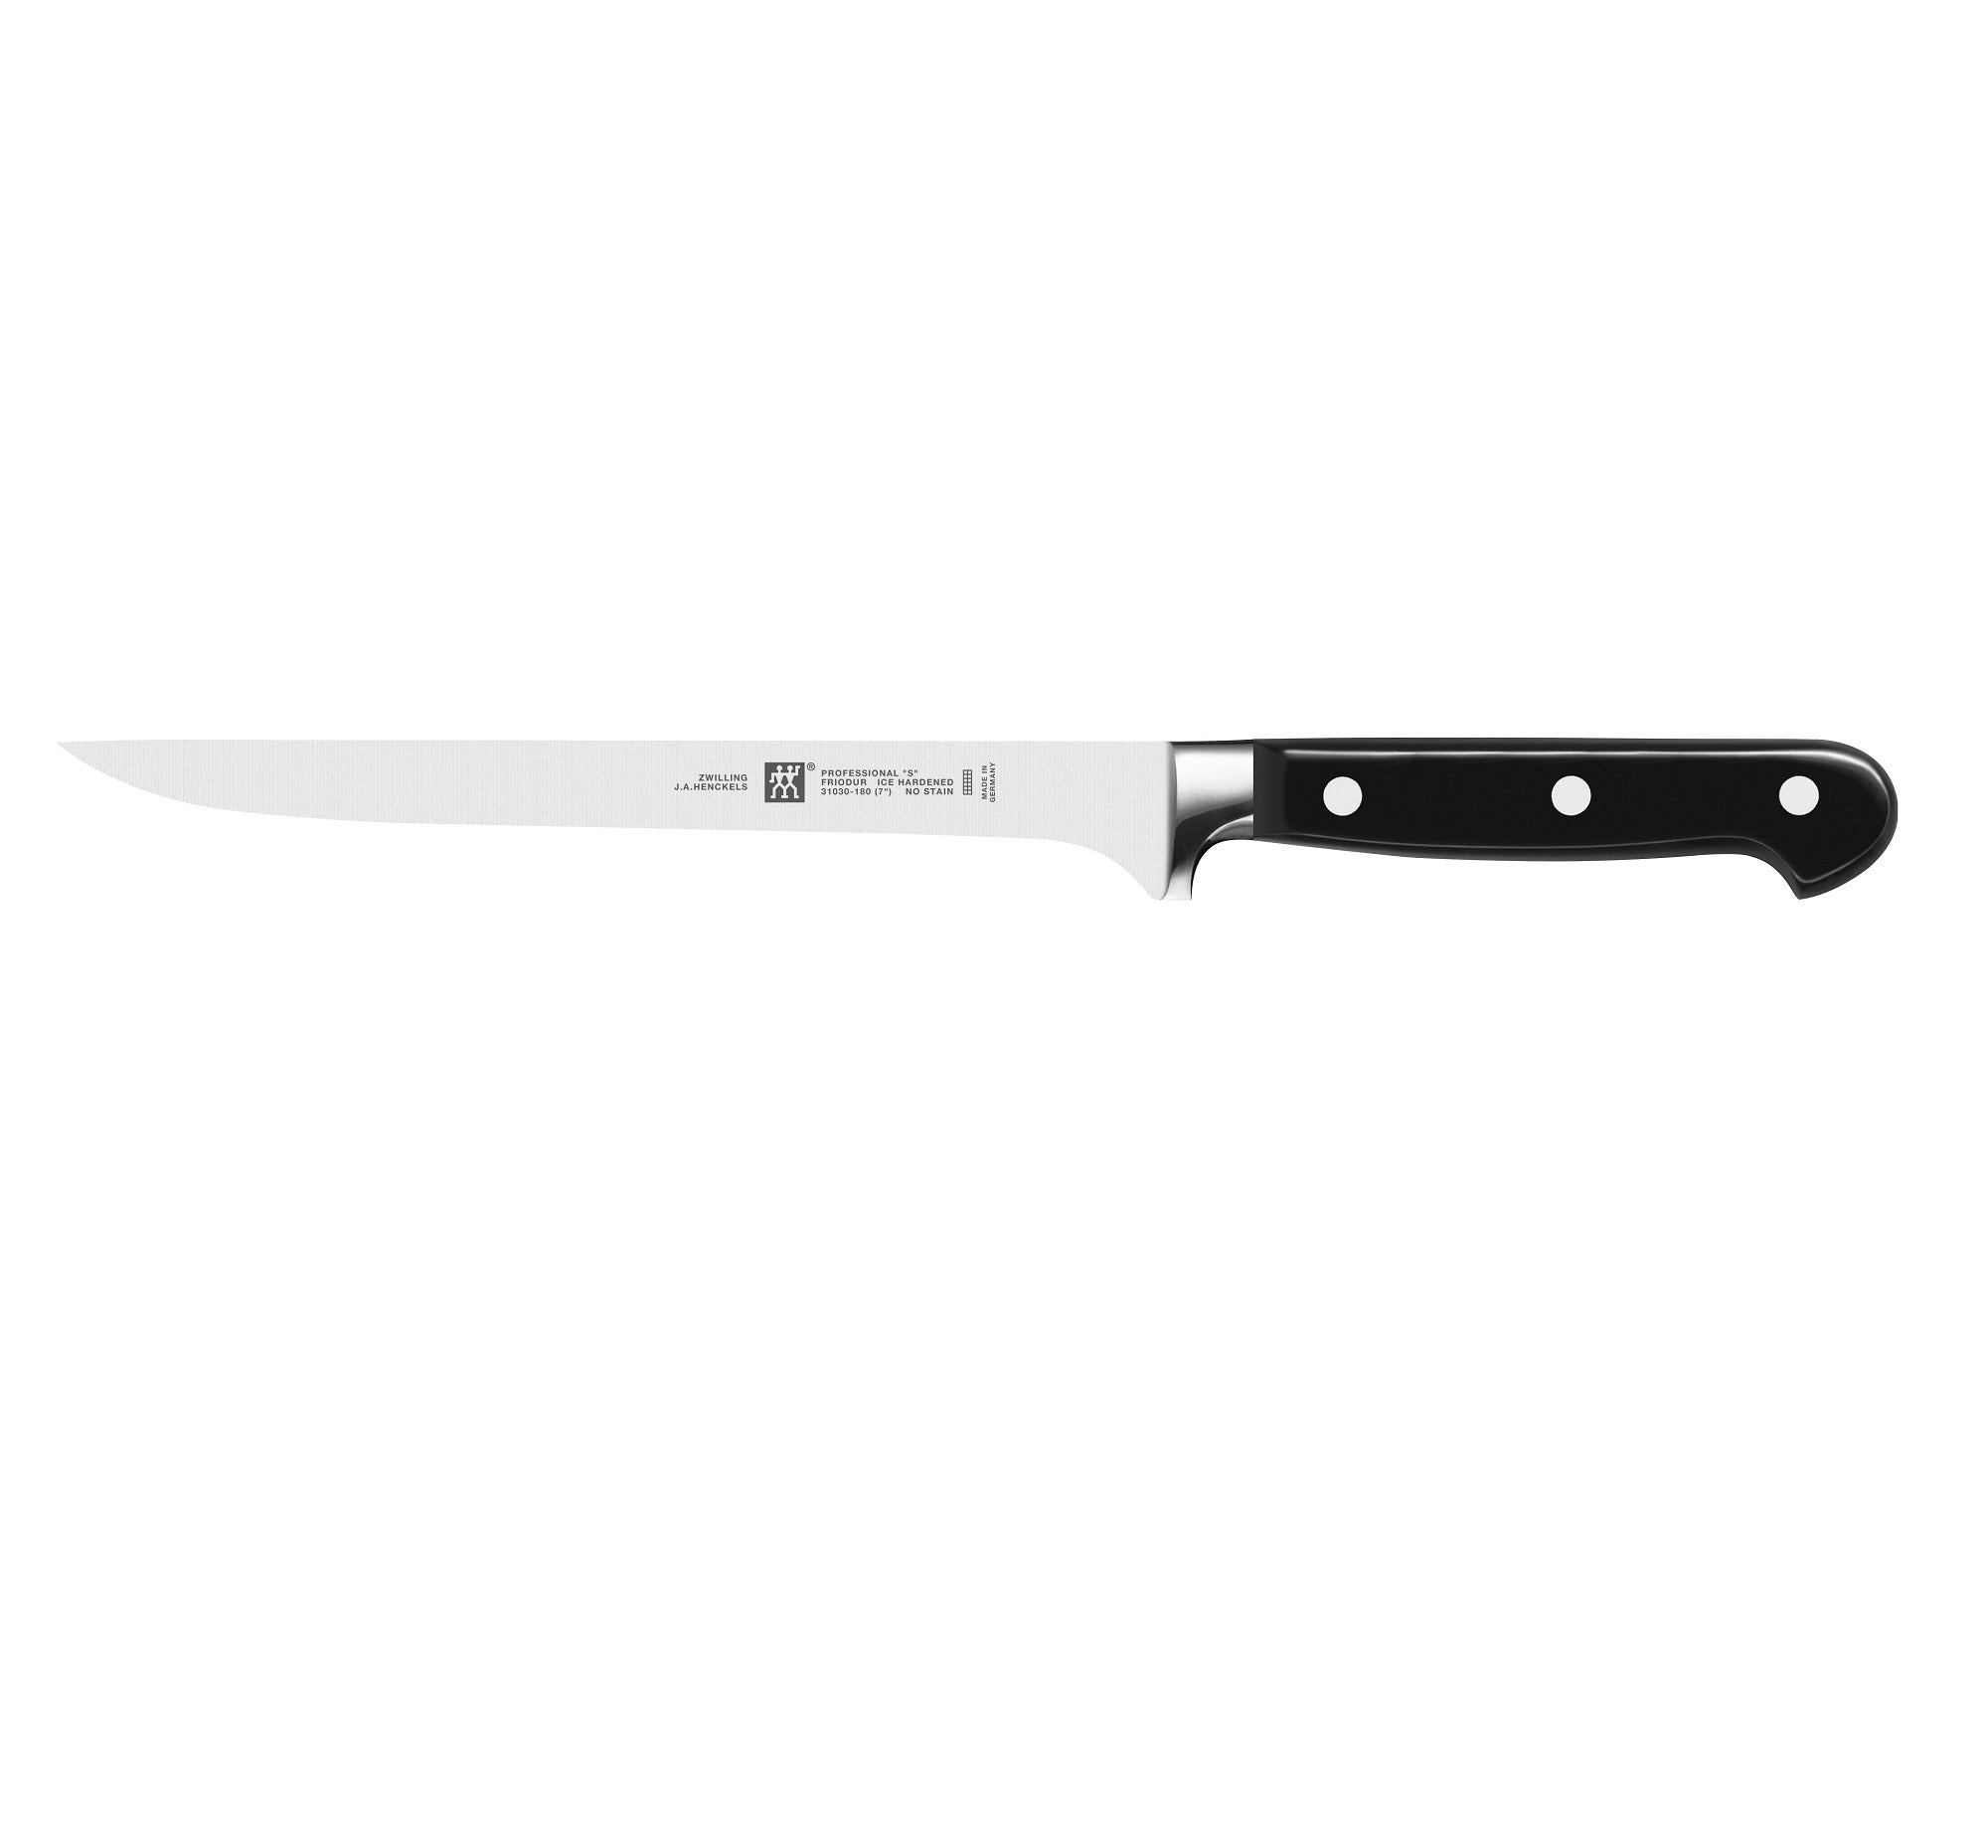 Zwilling PROFESSIONAL S Smooth filleting knife cm 18 Forged